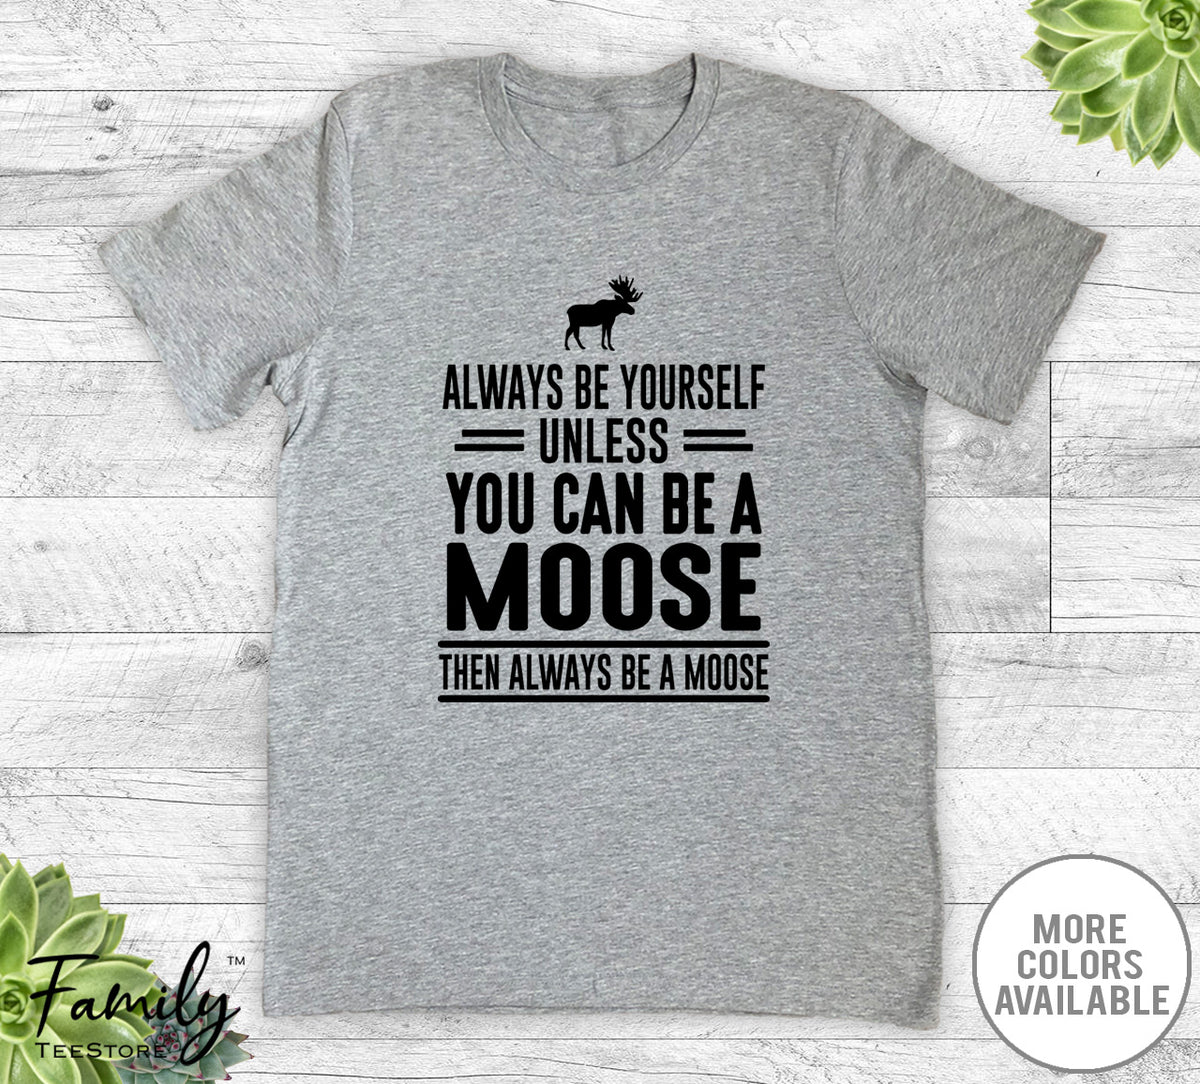 Always Be Yourself Unless You Can Be A Moose - Unisex T-shirt - Moose Shirt - Moose Gift - familyteeprints